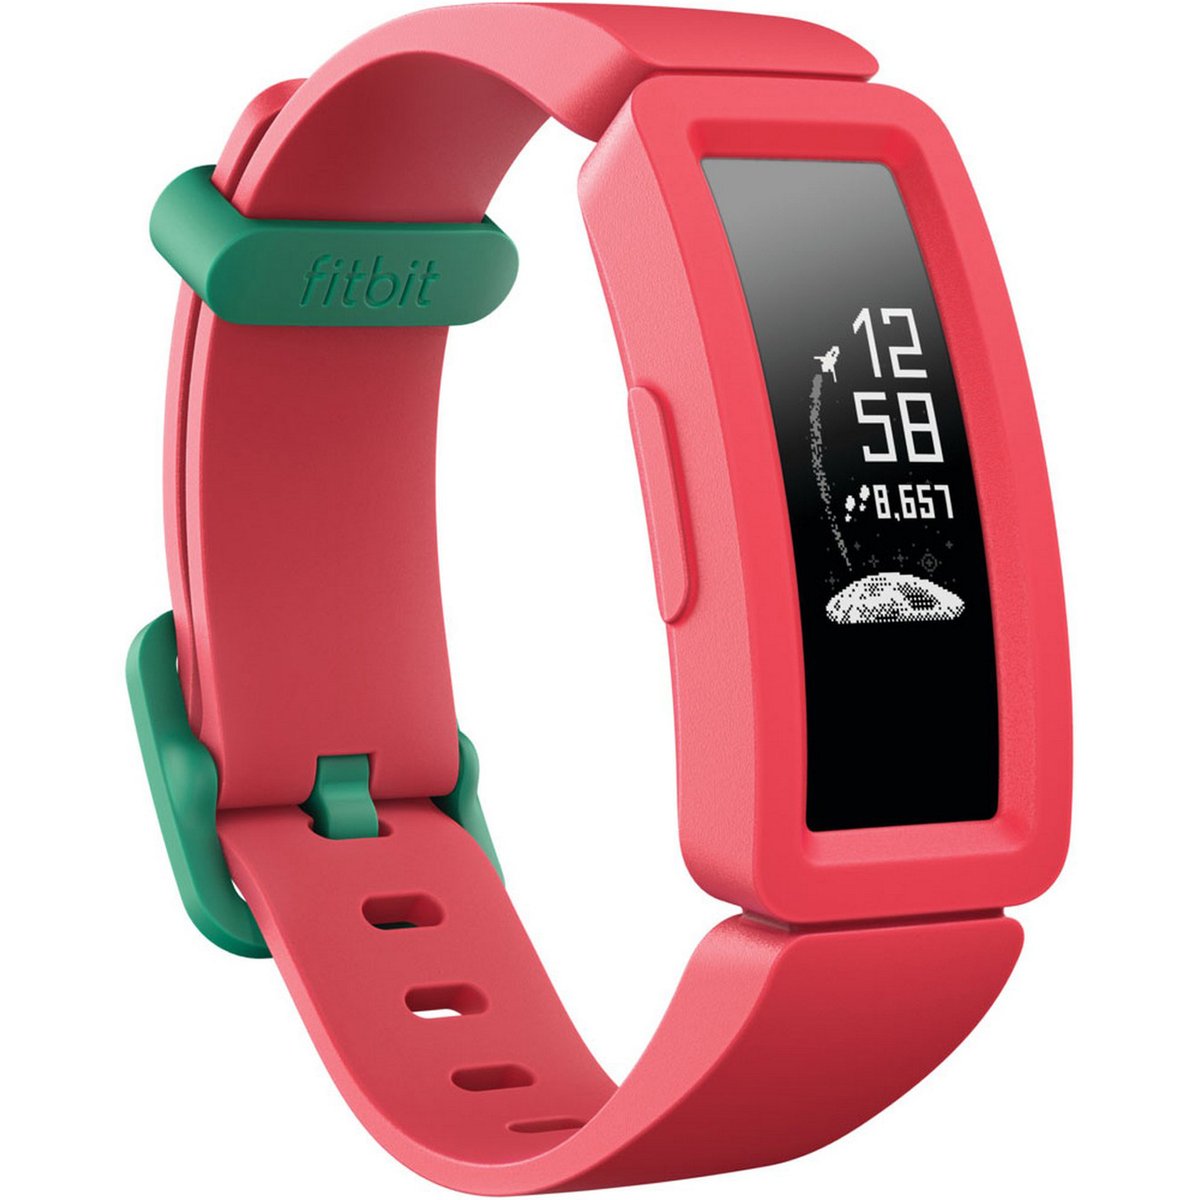 Fitbit Ace 2 Watermelon/Teal Fitness Band for Kids